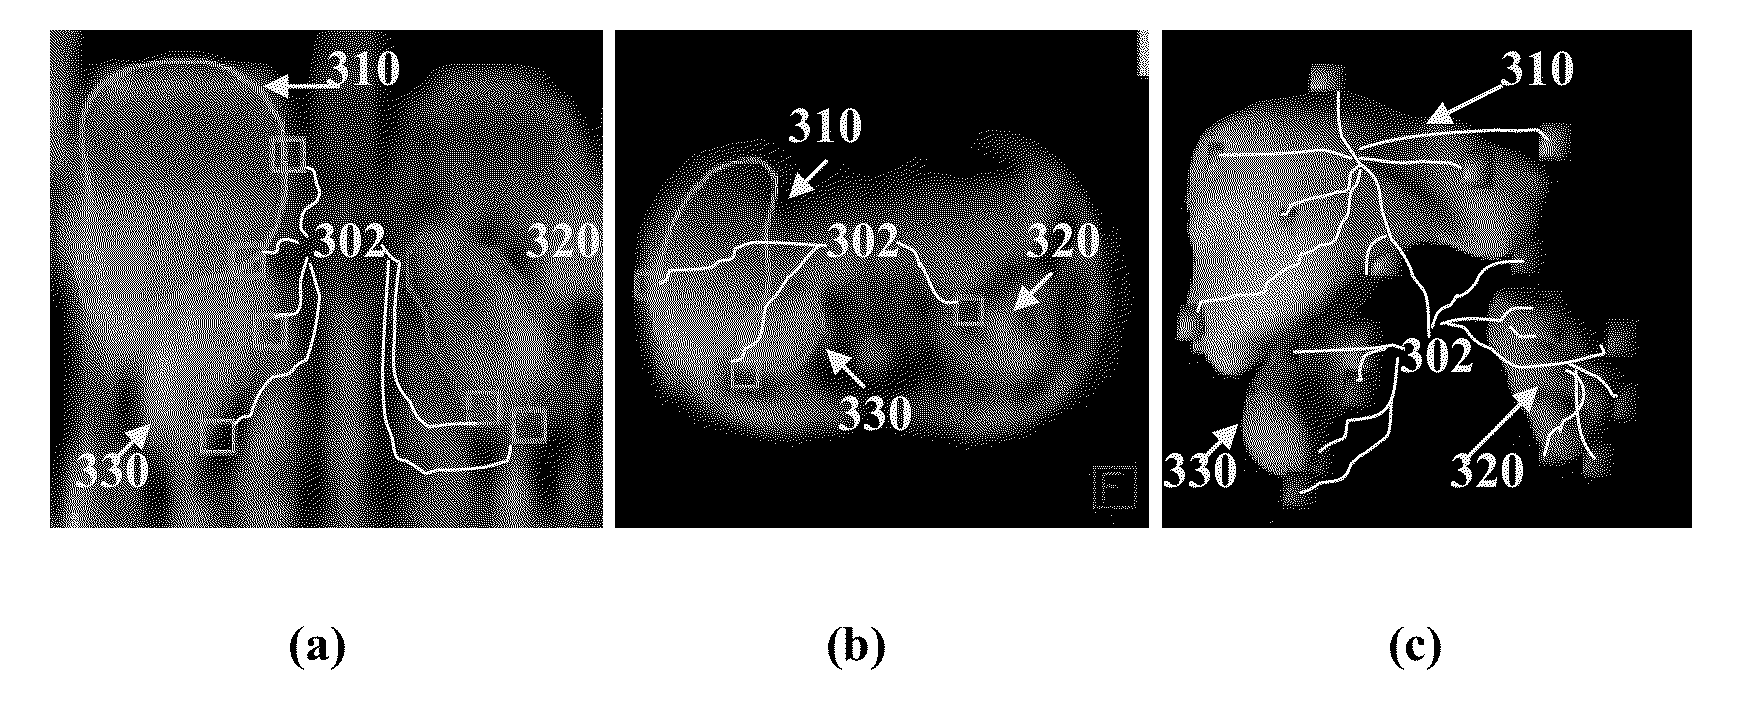 Method and System for Joint Multi-Organ Segmentation in Medical Image Data Using Local and Global Context